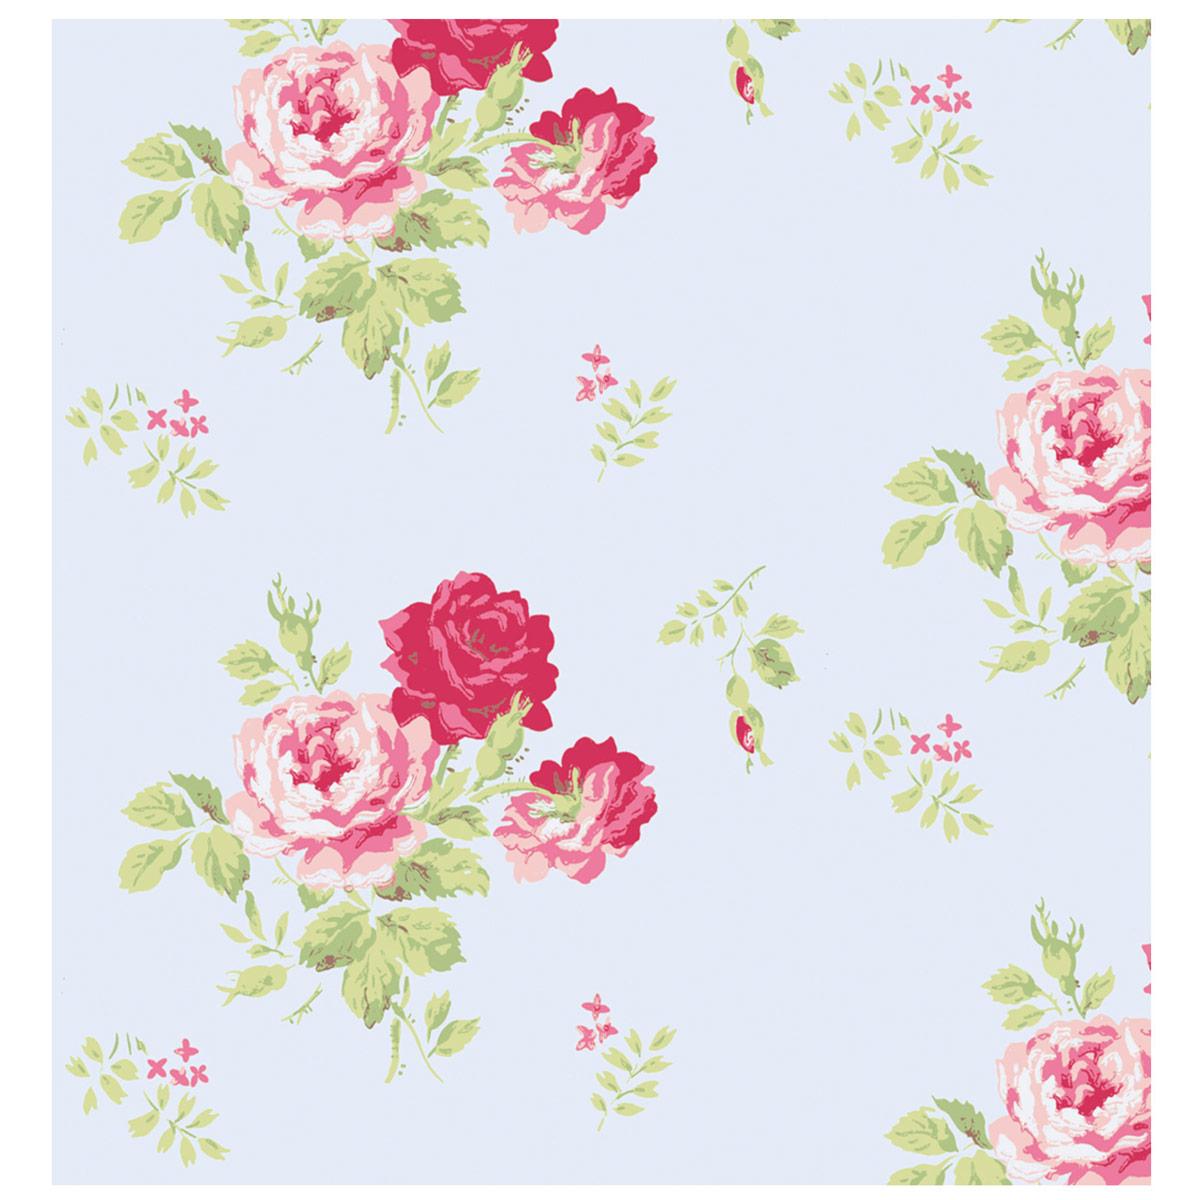 Free download Vintage Country Rose Wallpaper xx 1200x1200